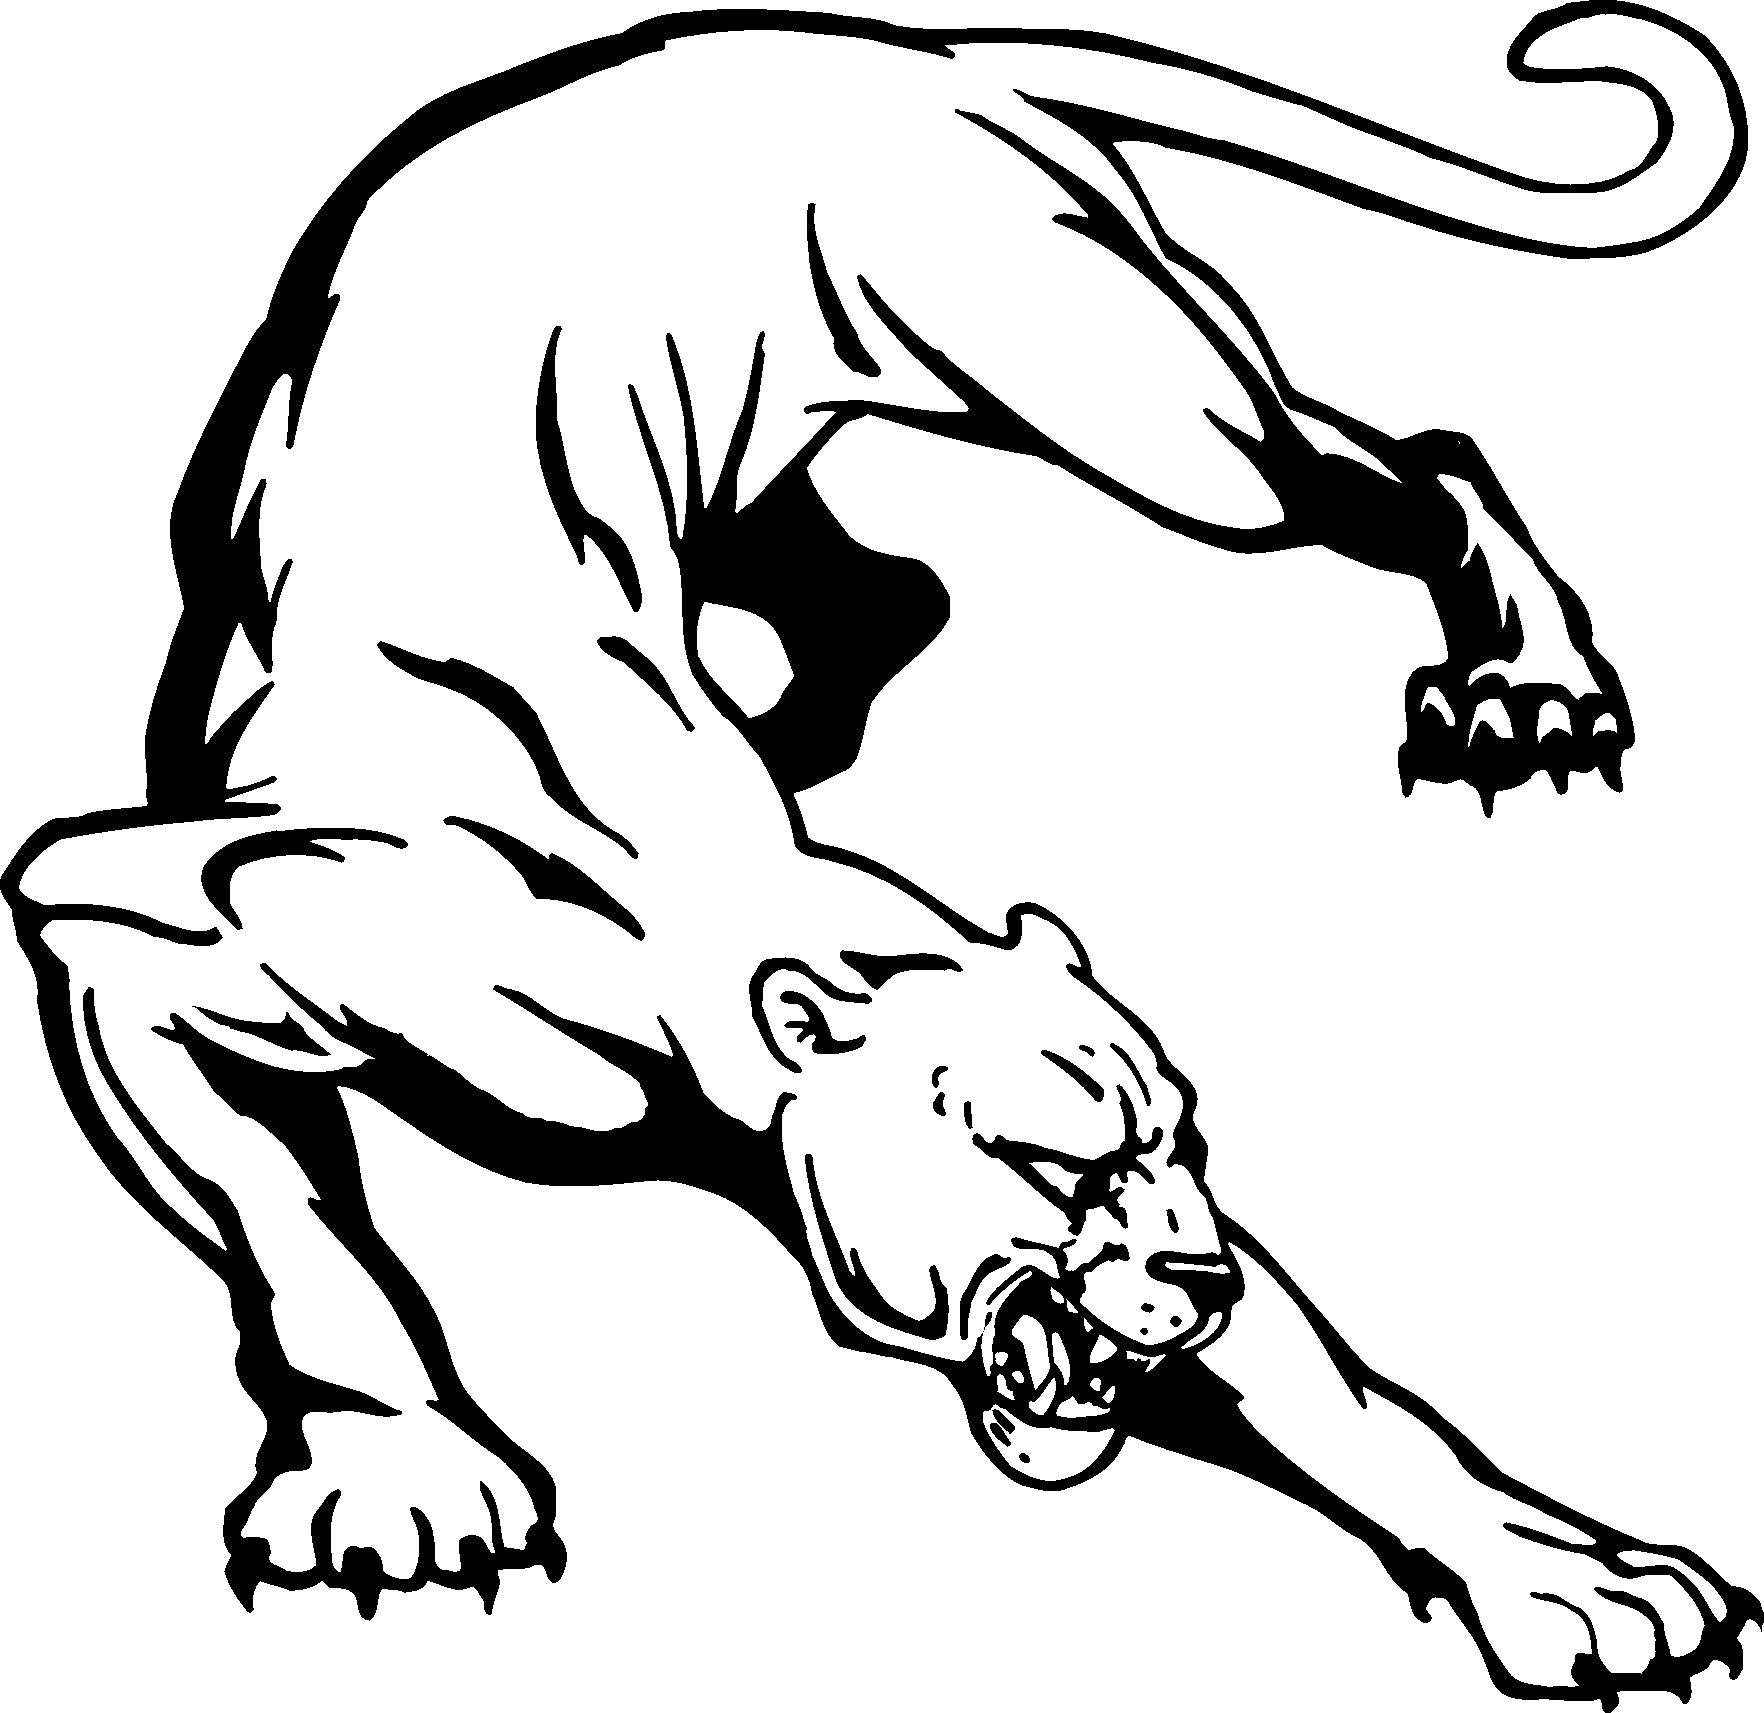 Panther Clipart - ClipArt Best